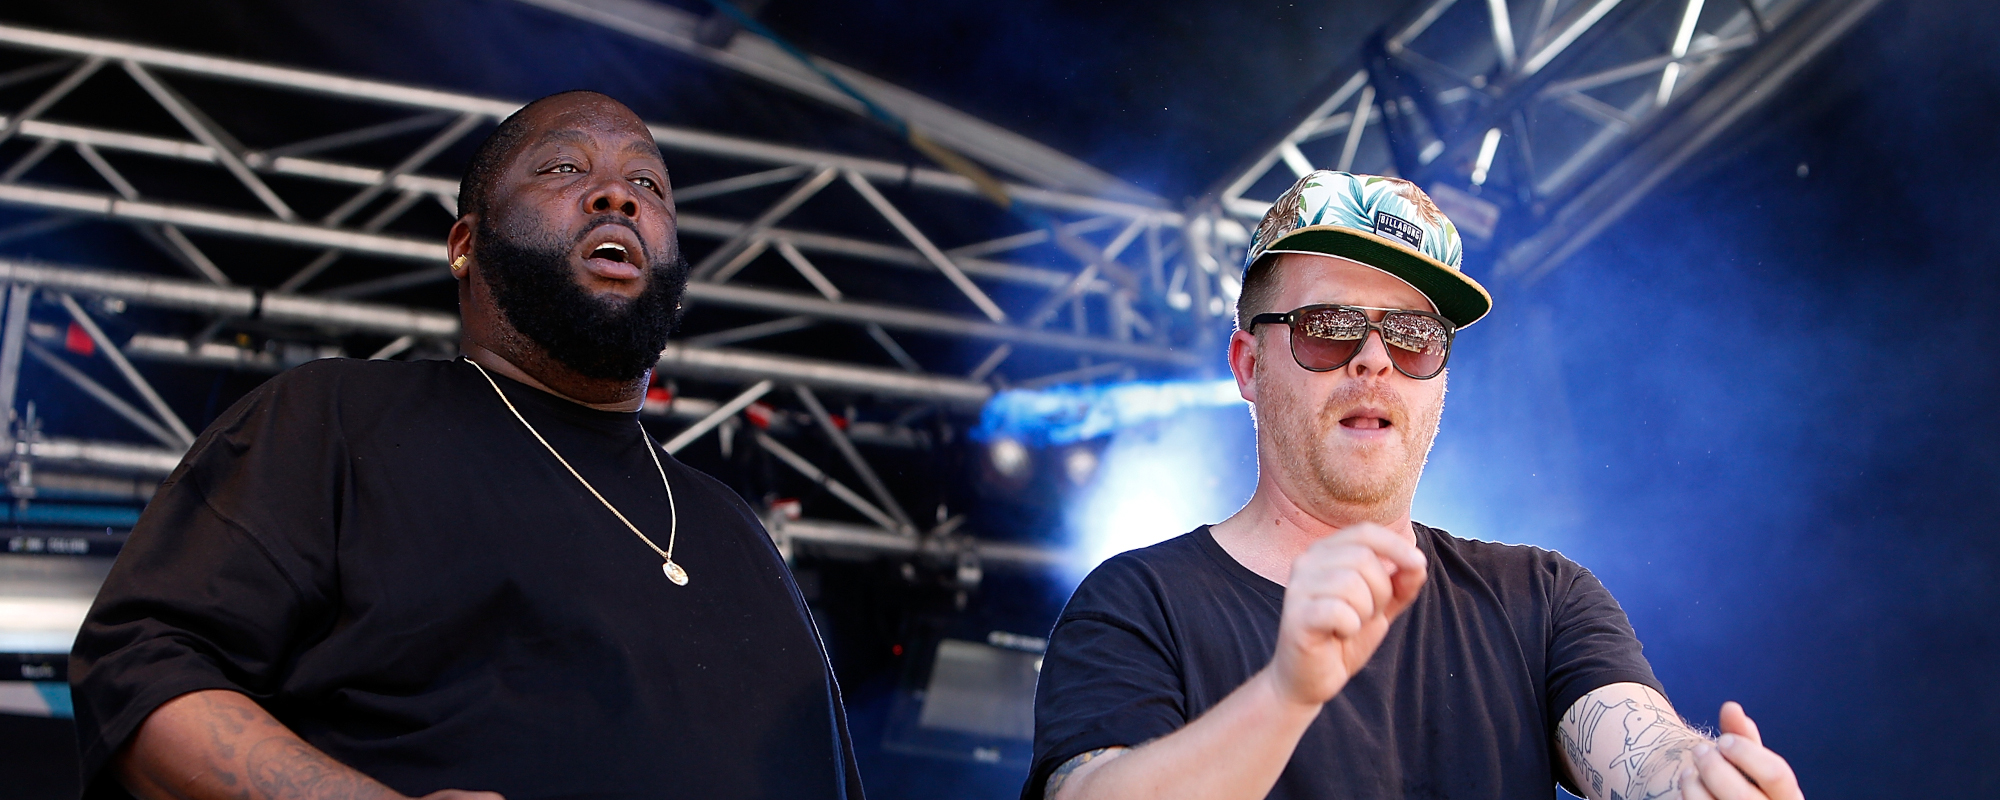 The Story Behind Killer Mike and El-P’s Writing Partnership